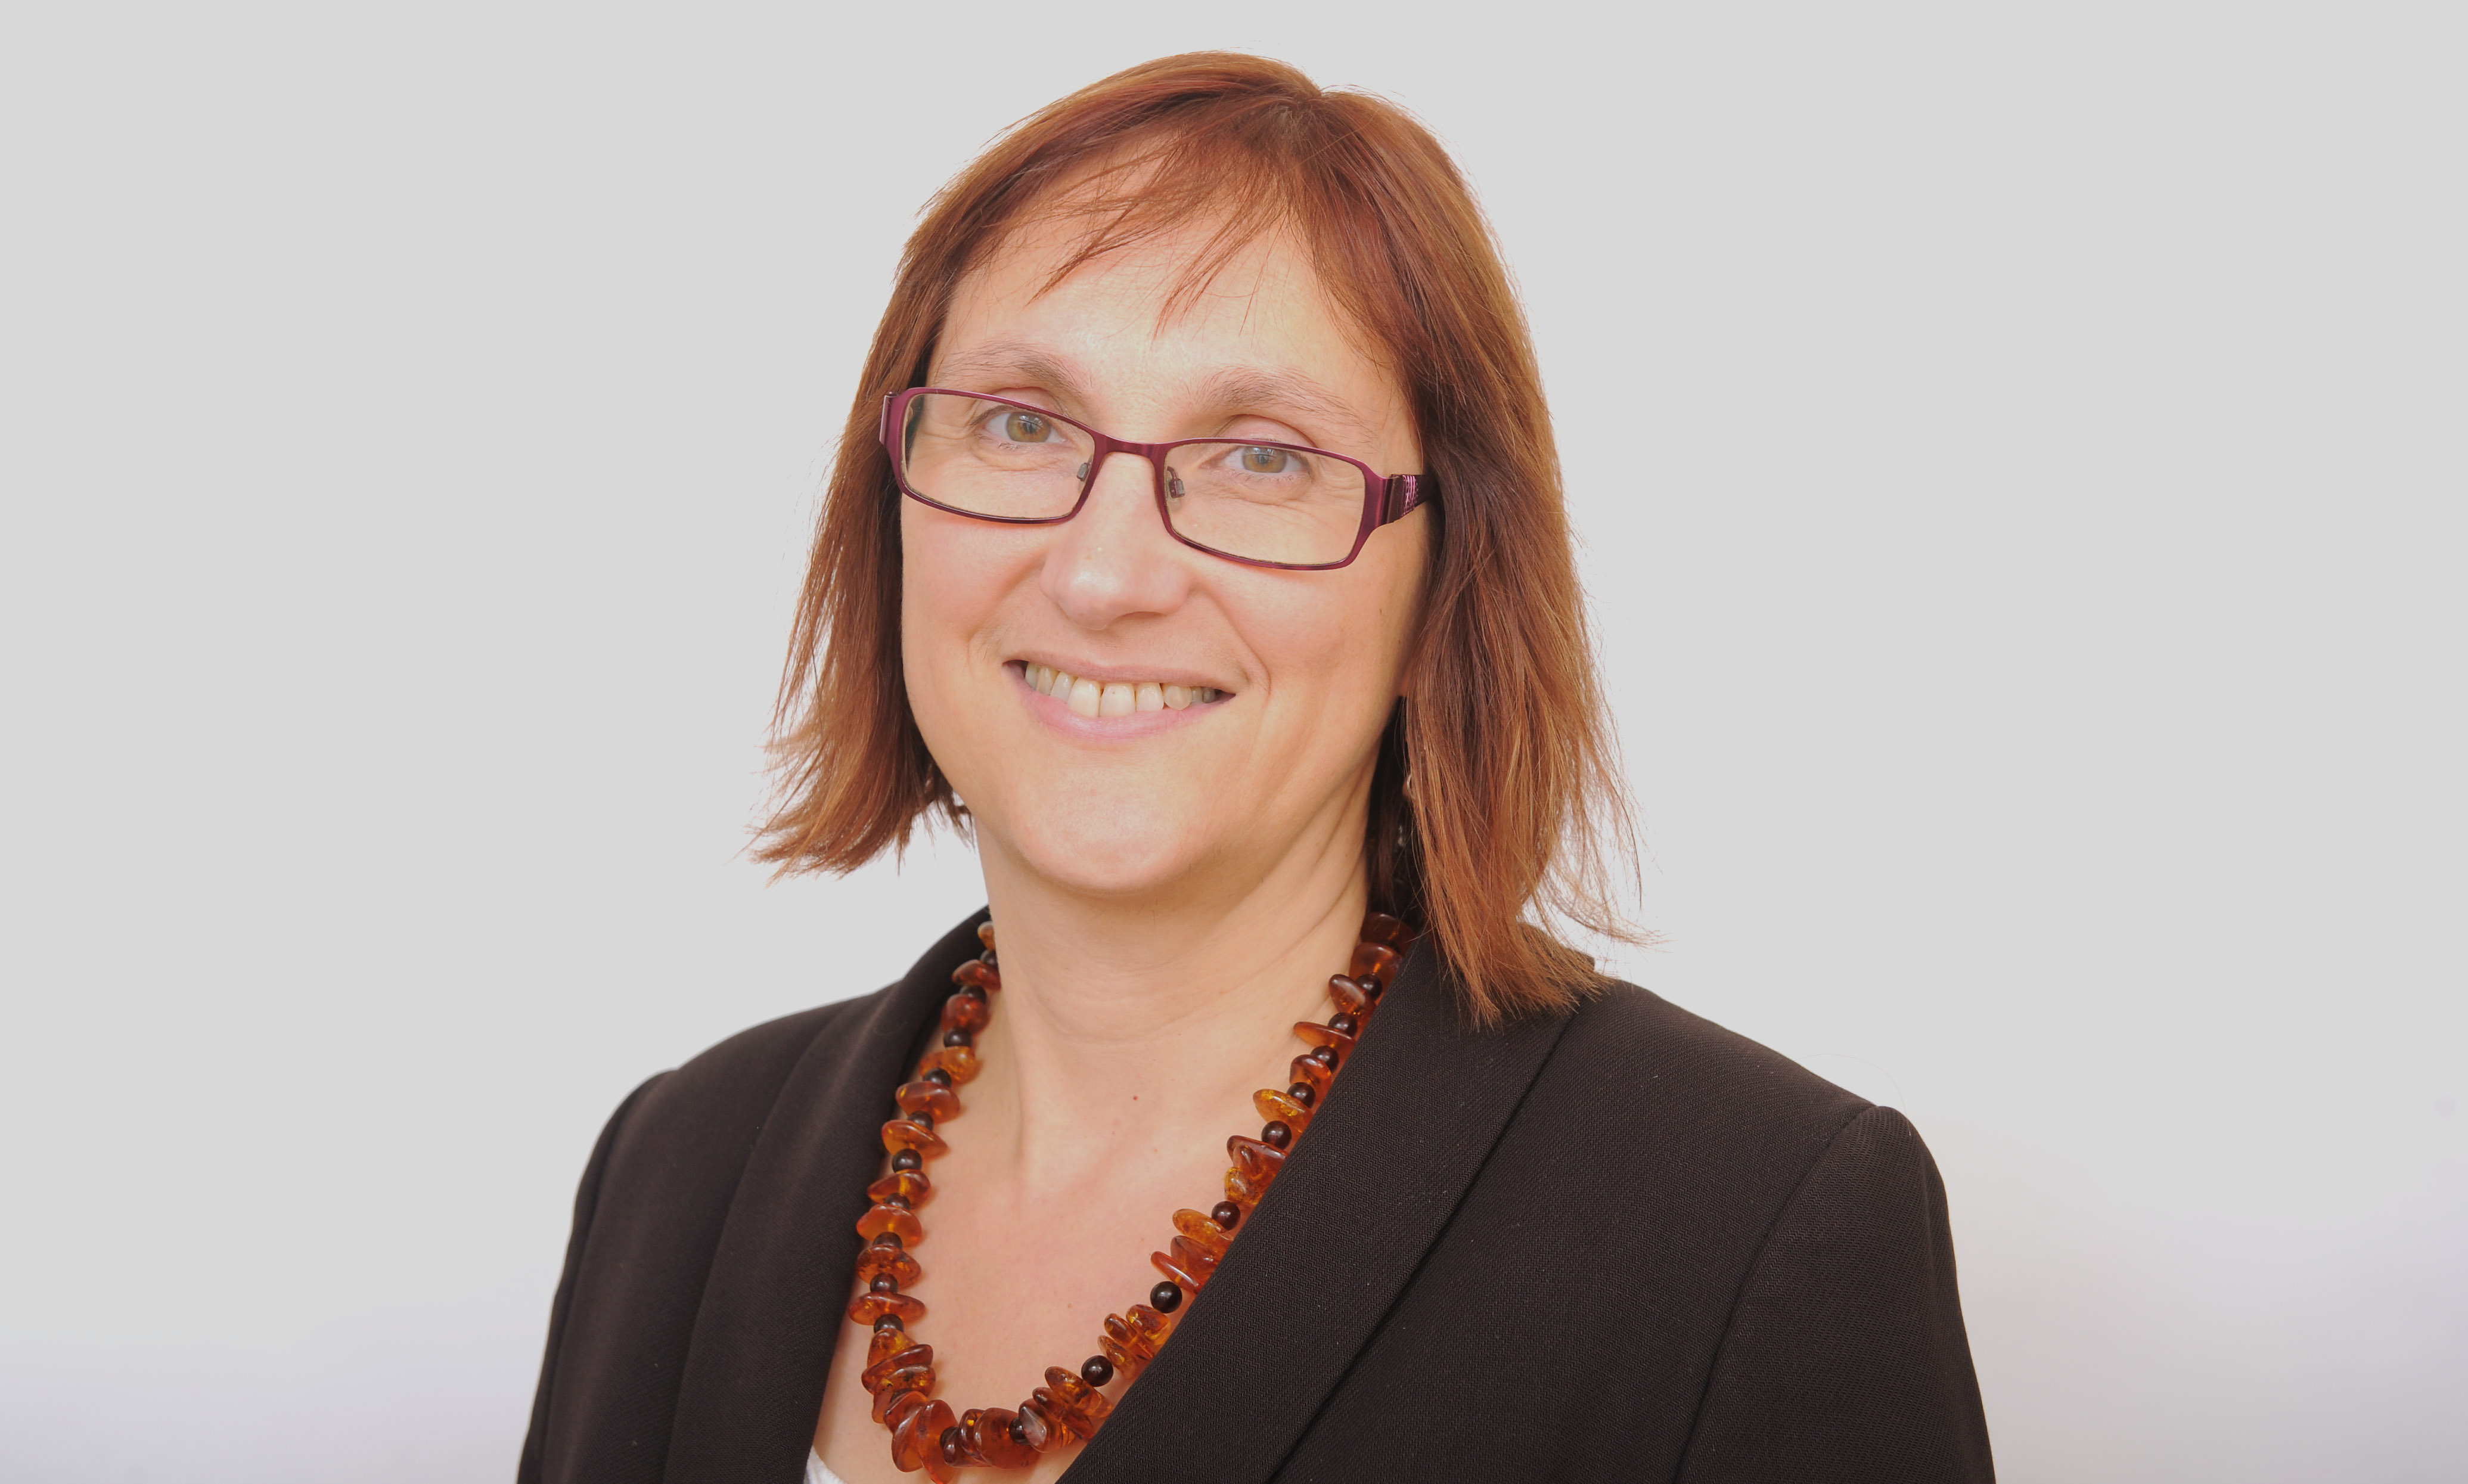 Sarah Norman, WMCA wellbeing executive lead, is gathering global best practice for Thrive West Midlands